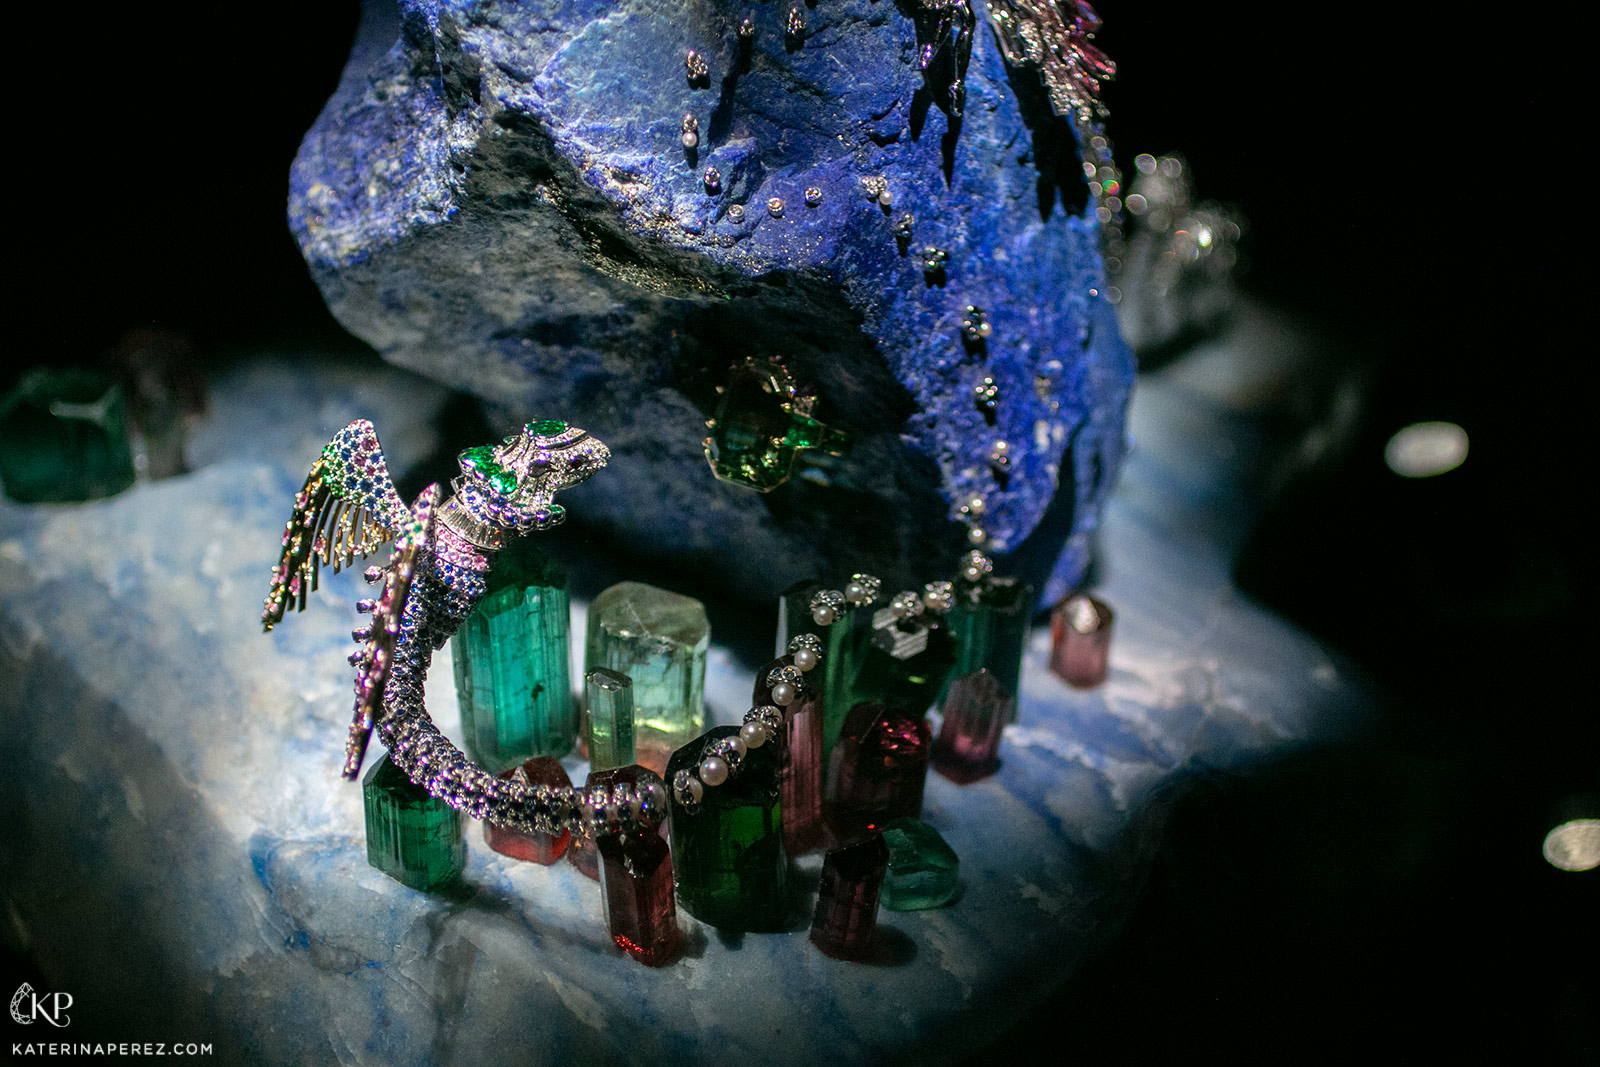 Perched on crystals of tourmaline, a gem-set chimera spreads its precious wings 